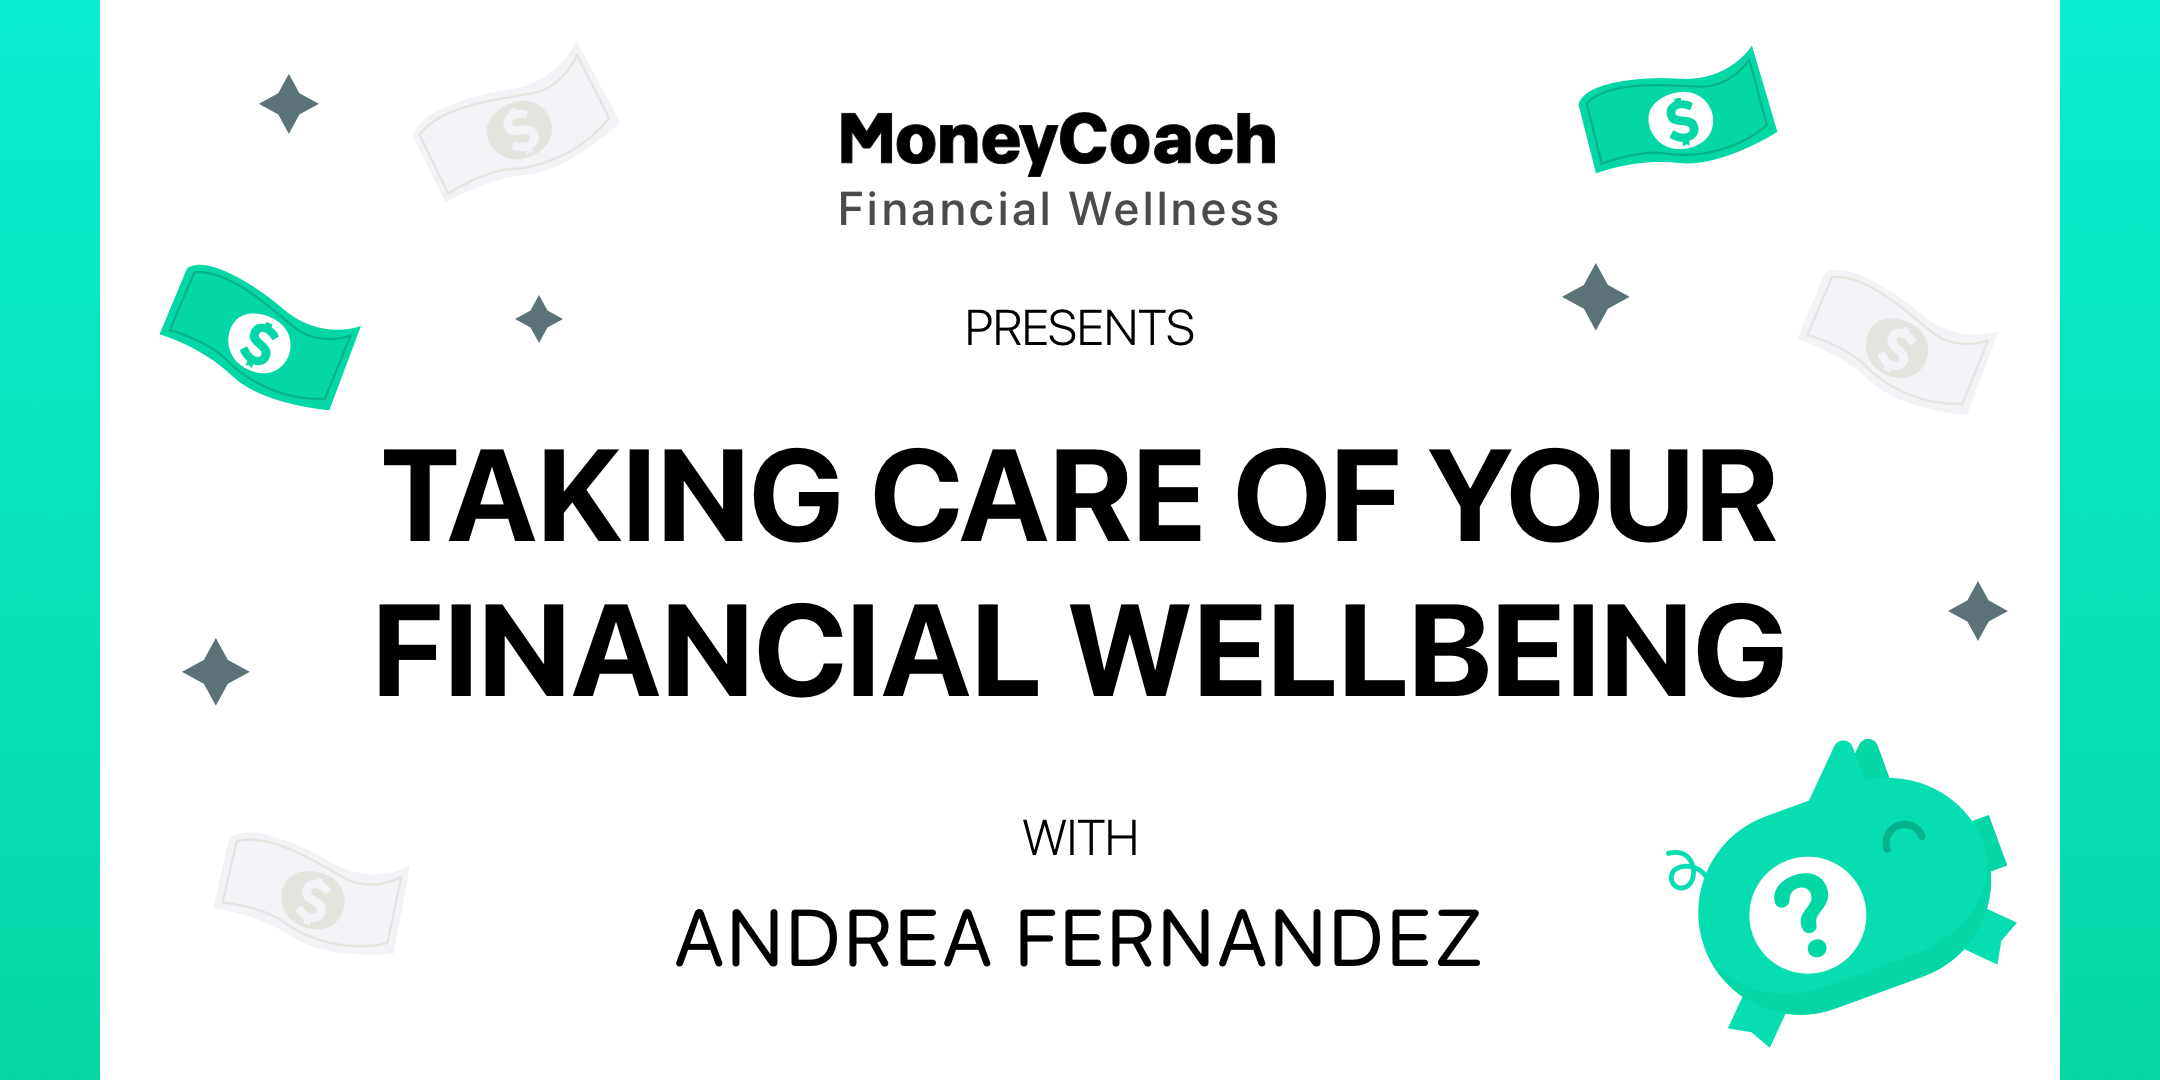 Join MoneyCoach's First-Ever Free Financial Literacy Webinar "Money Talk" With Andrea Fernandez